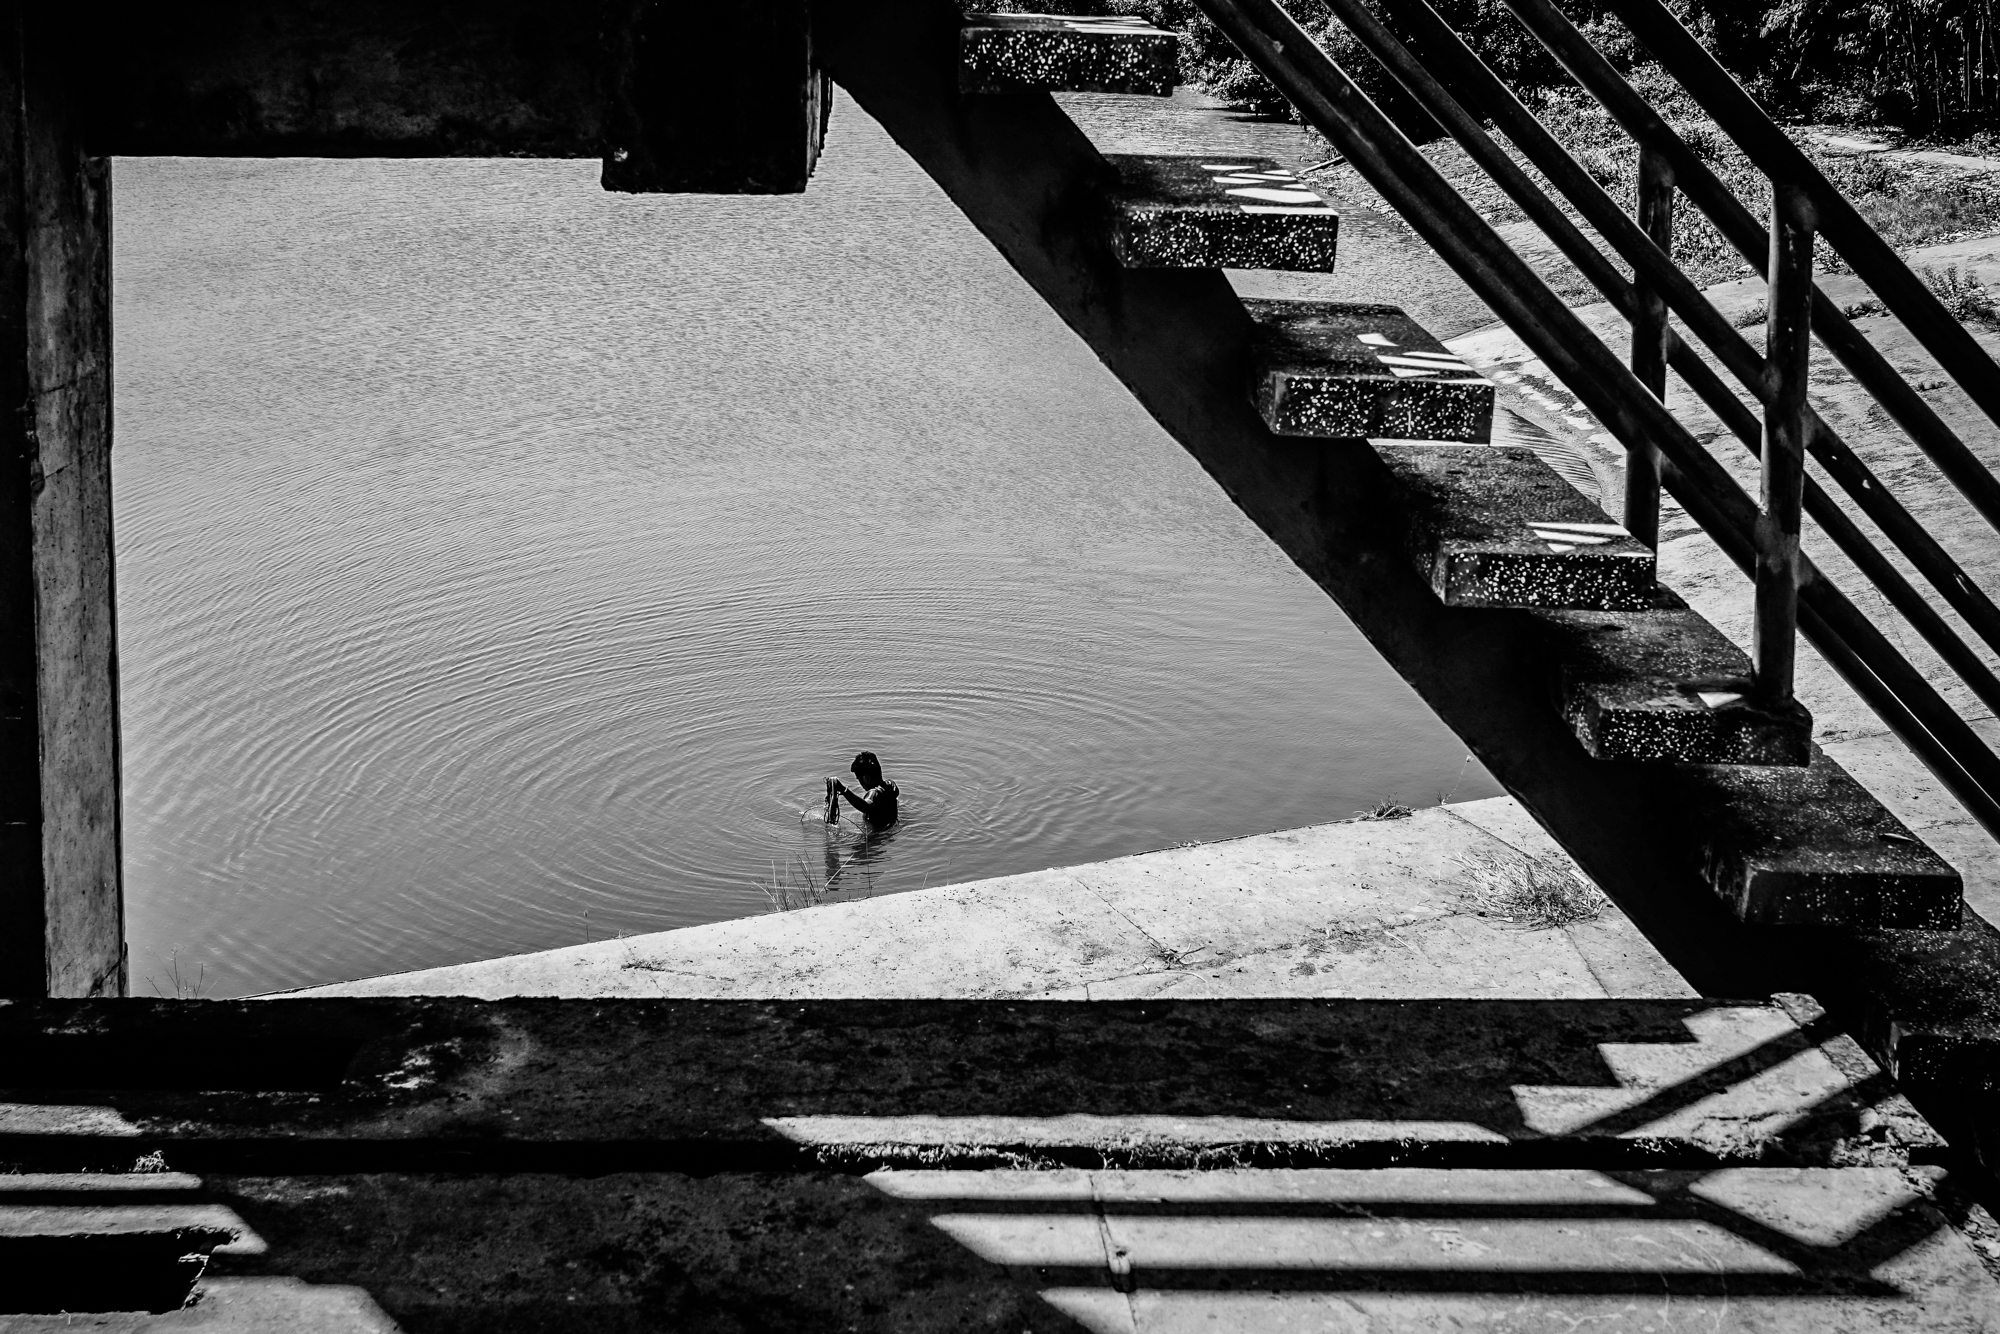 A man fishes in a water lock meant to keep salt water from intruding on rice fields in Mekong Delta, Vietnam